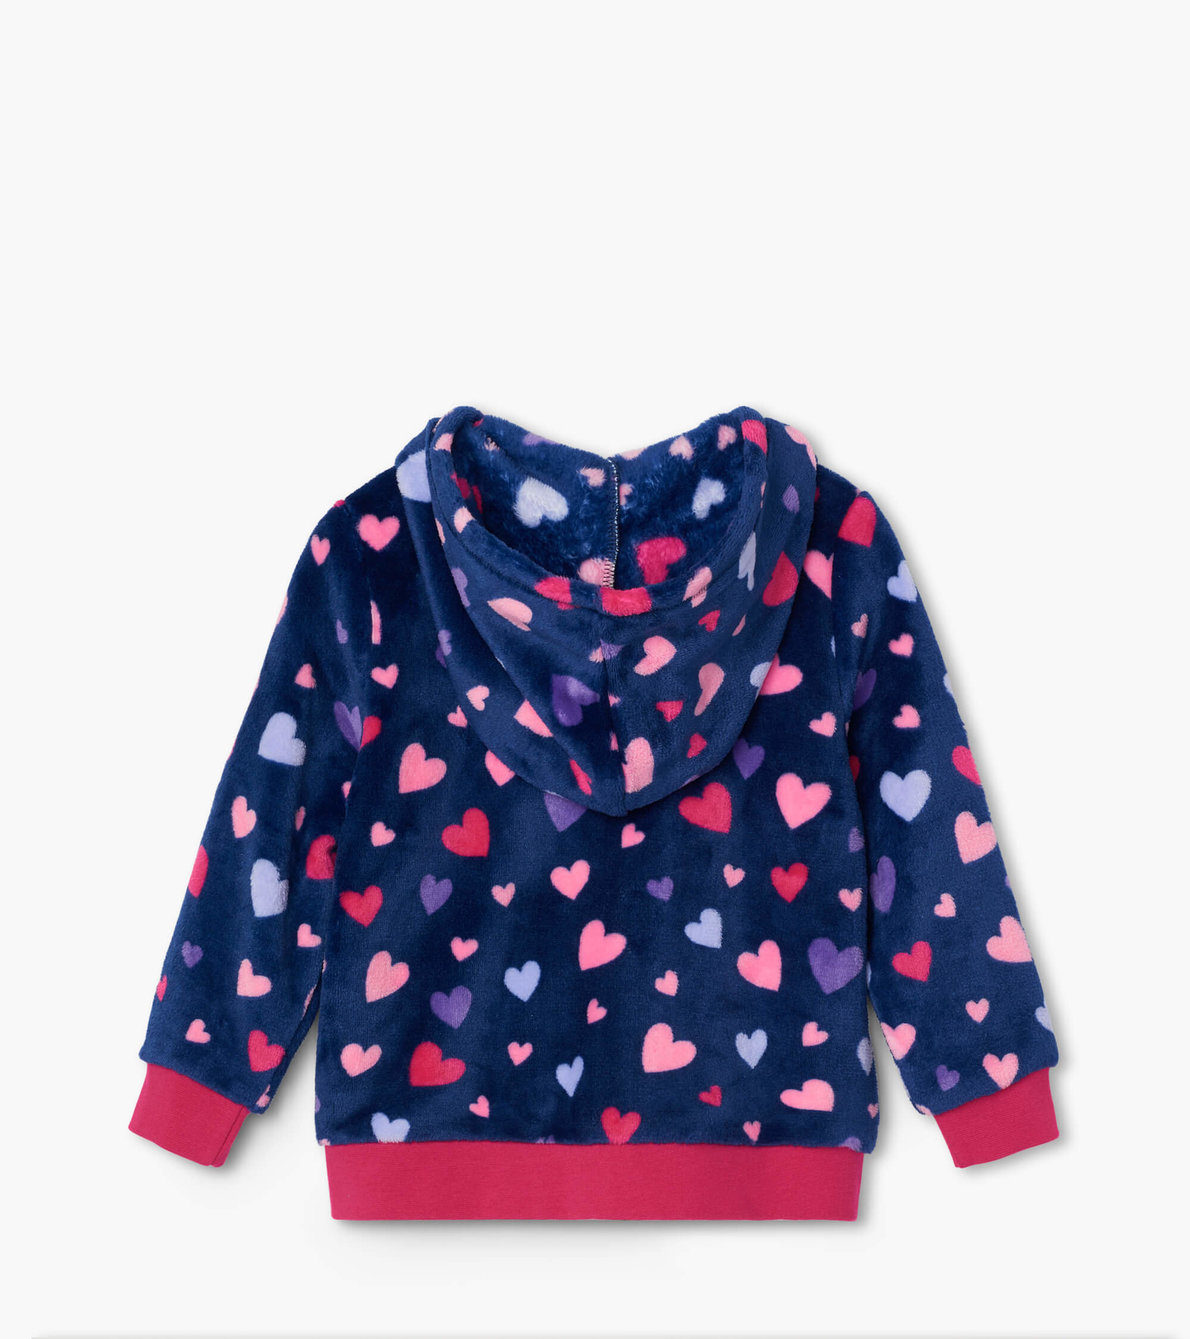 View larger image of Confetti Hearts Fuzzy Fleece Hooded Jacket